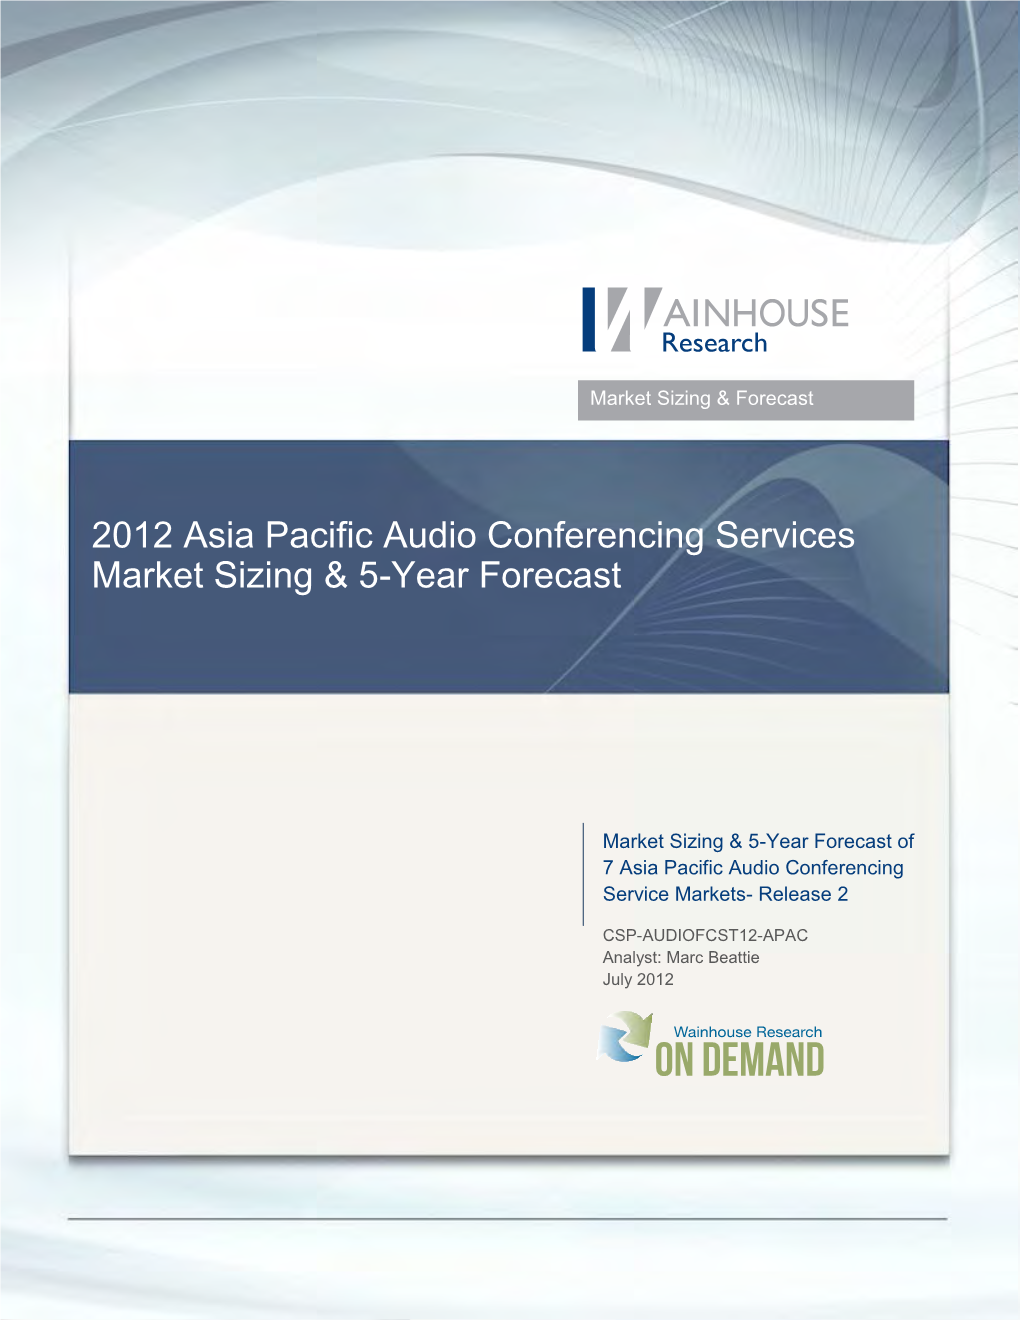 2012 Asia Pacific Audio Conferencing Services Market Sizing & 5-Year